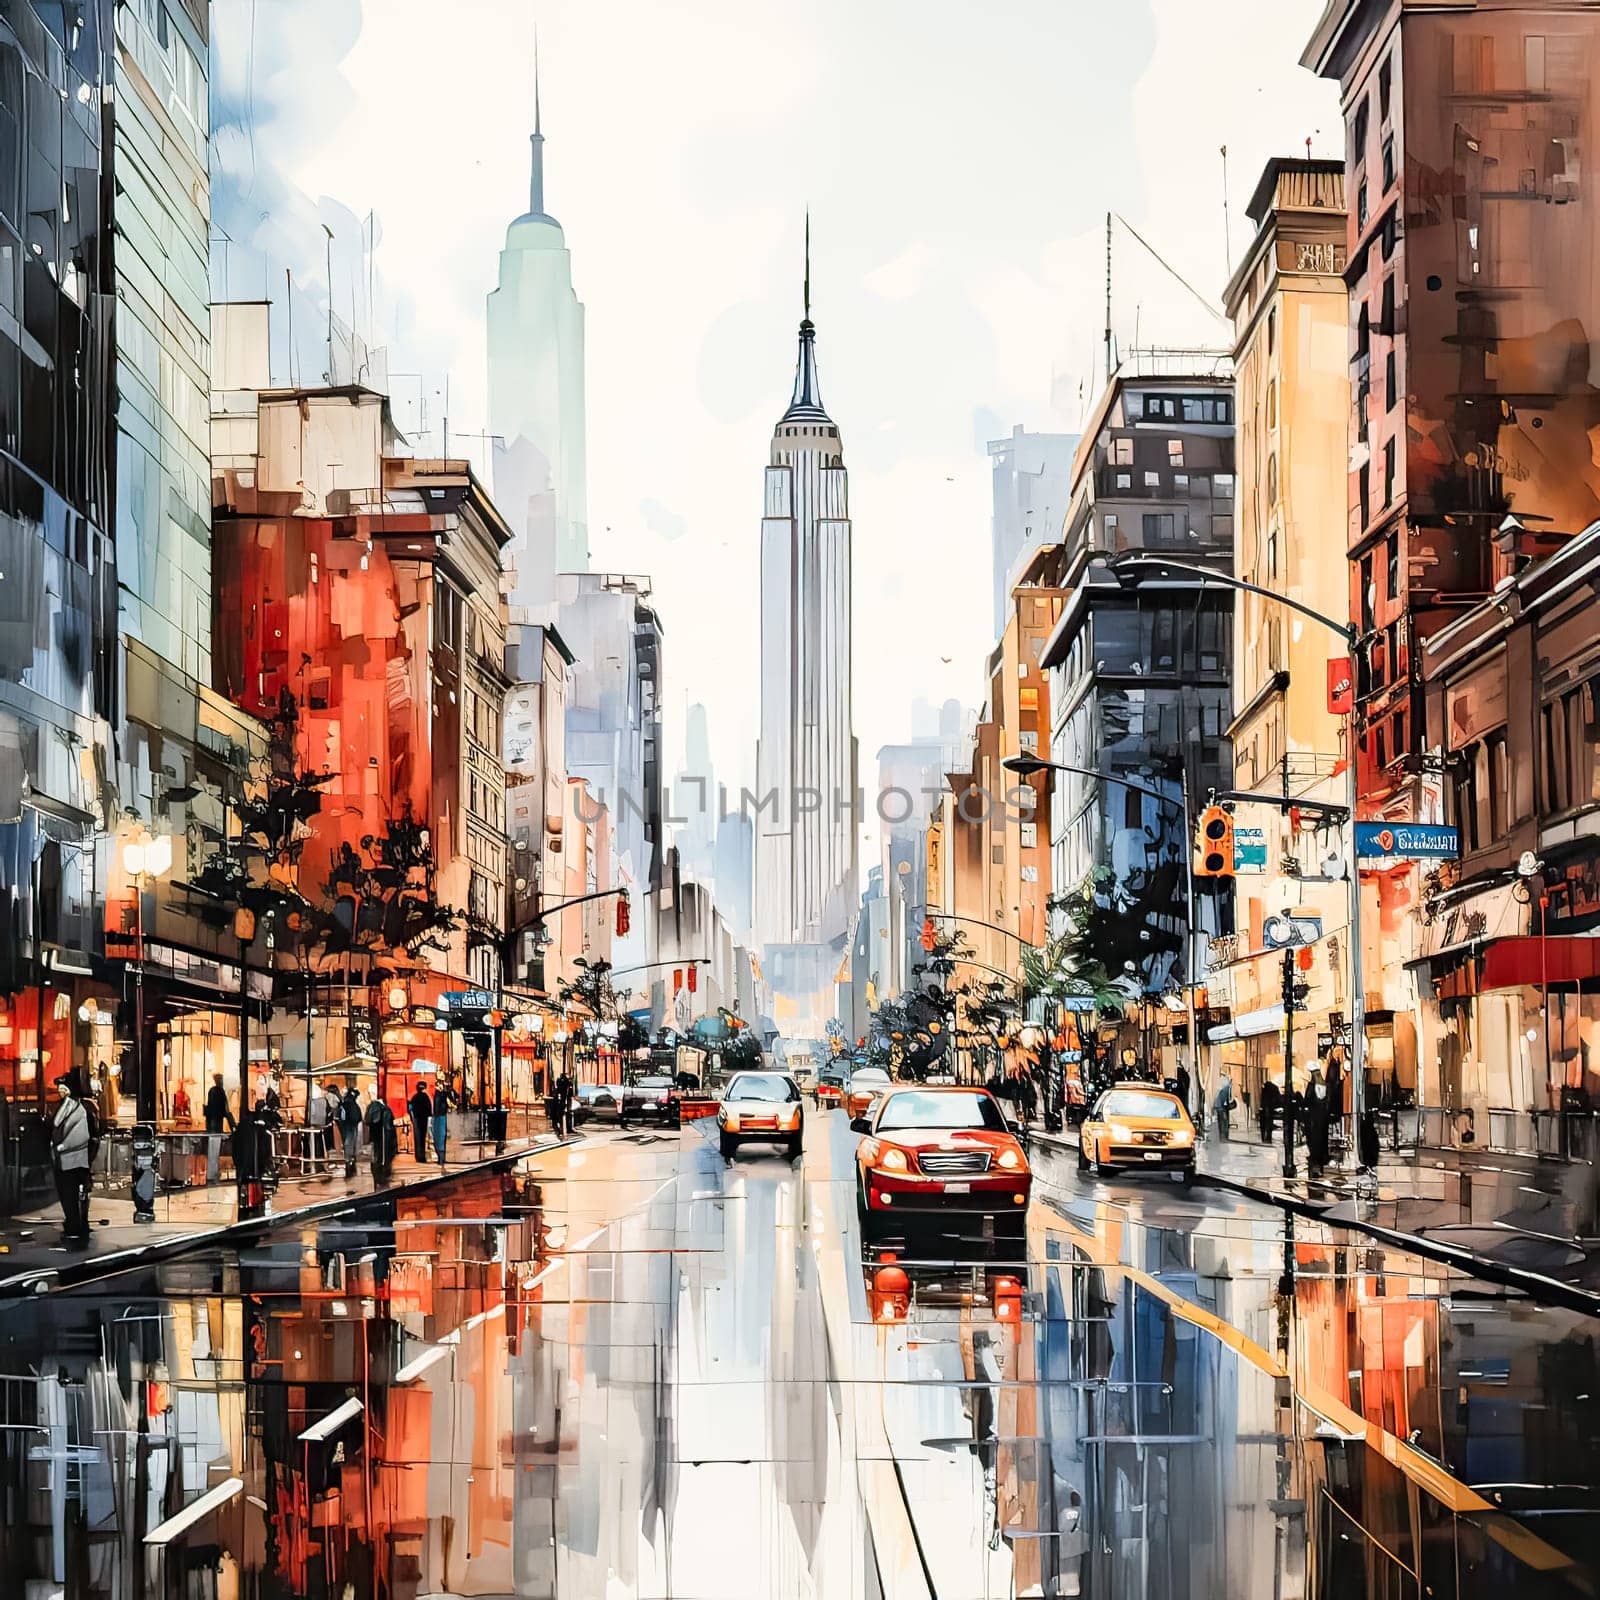 Watercolor sketch captures the energy of New York streets and iconic skyscrapers by Alla_Morozova93